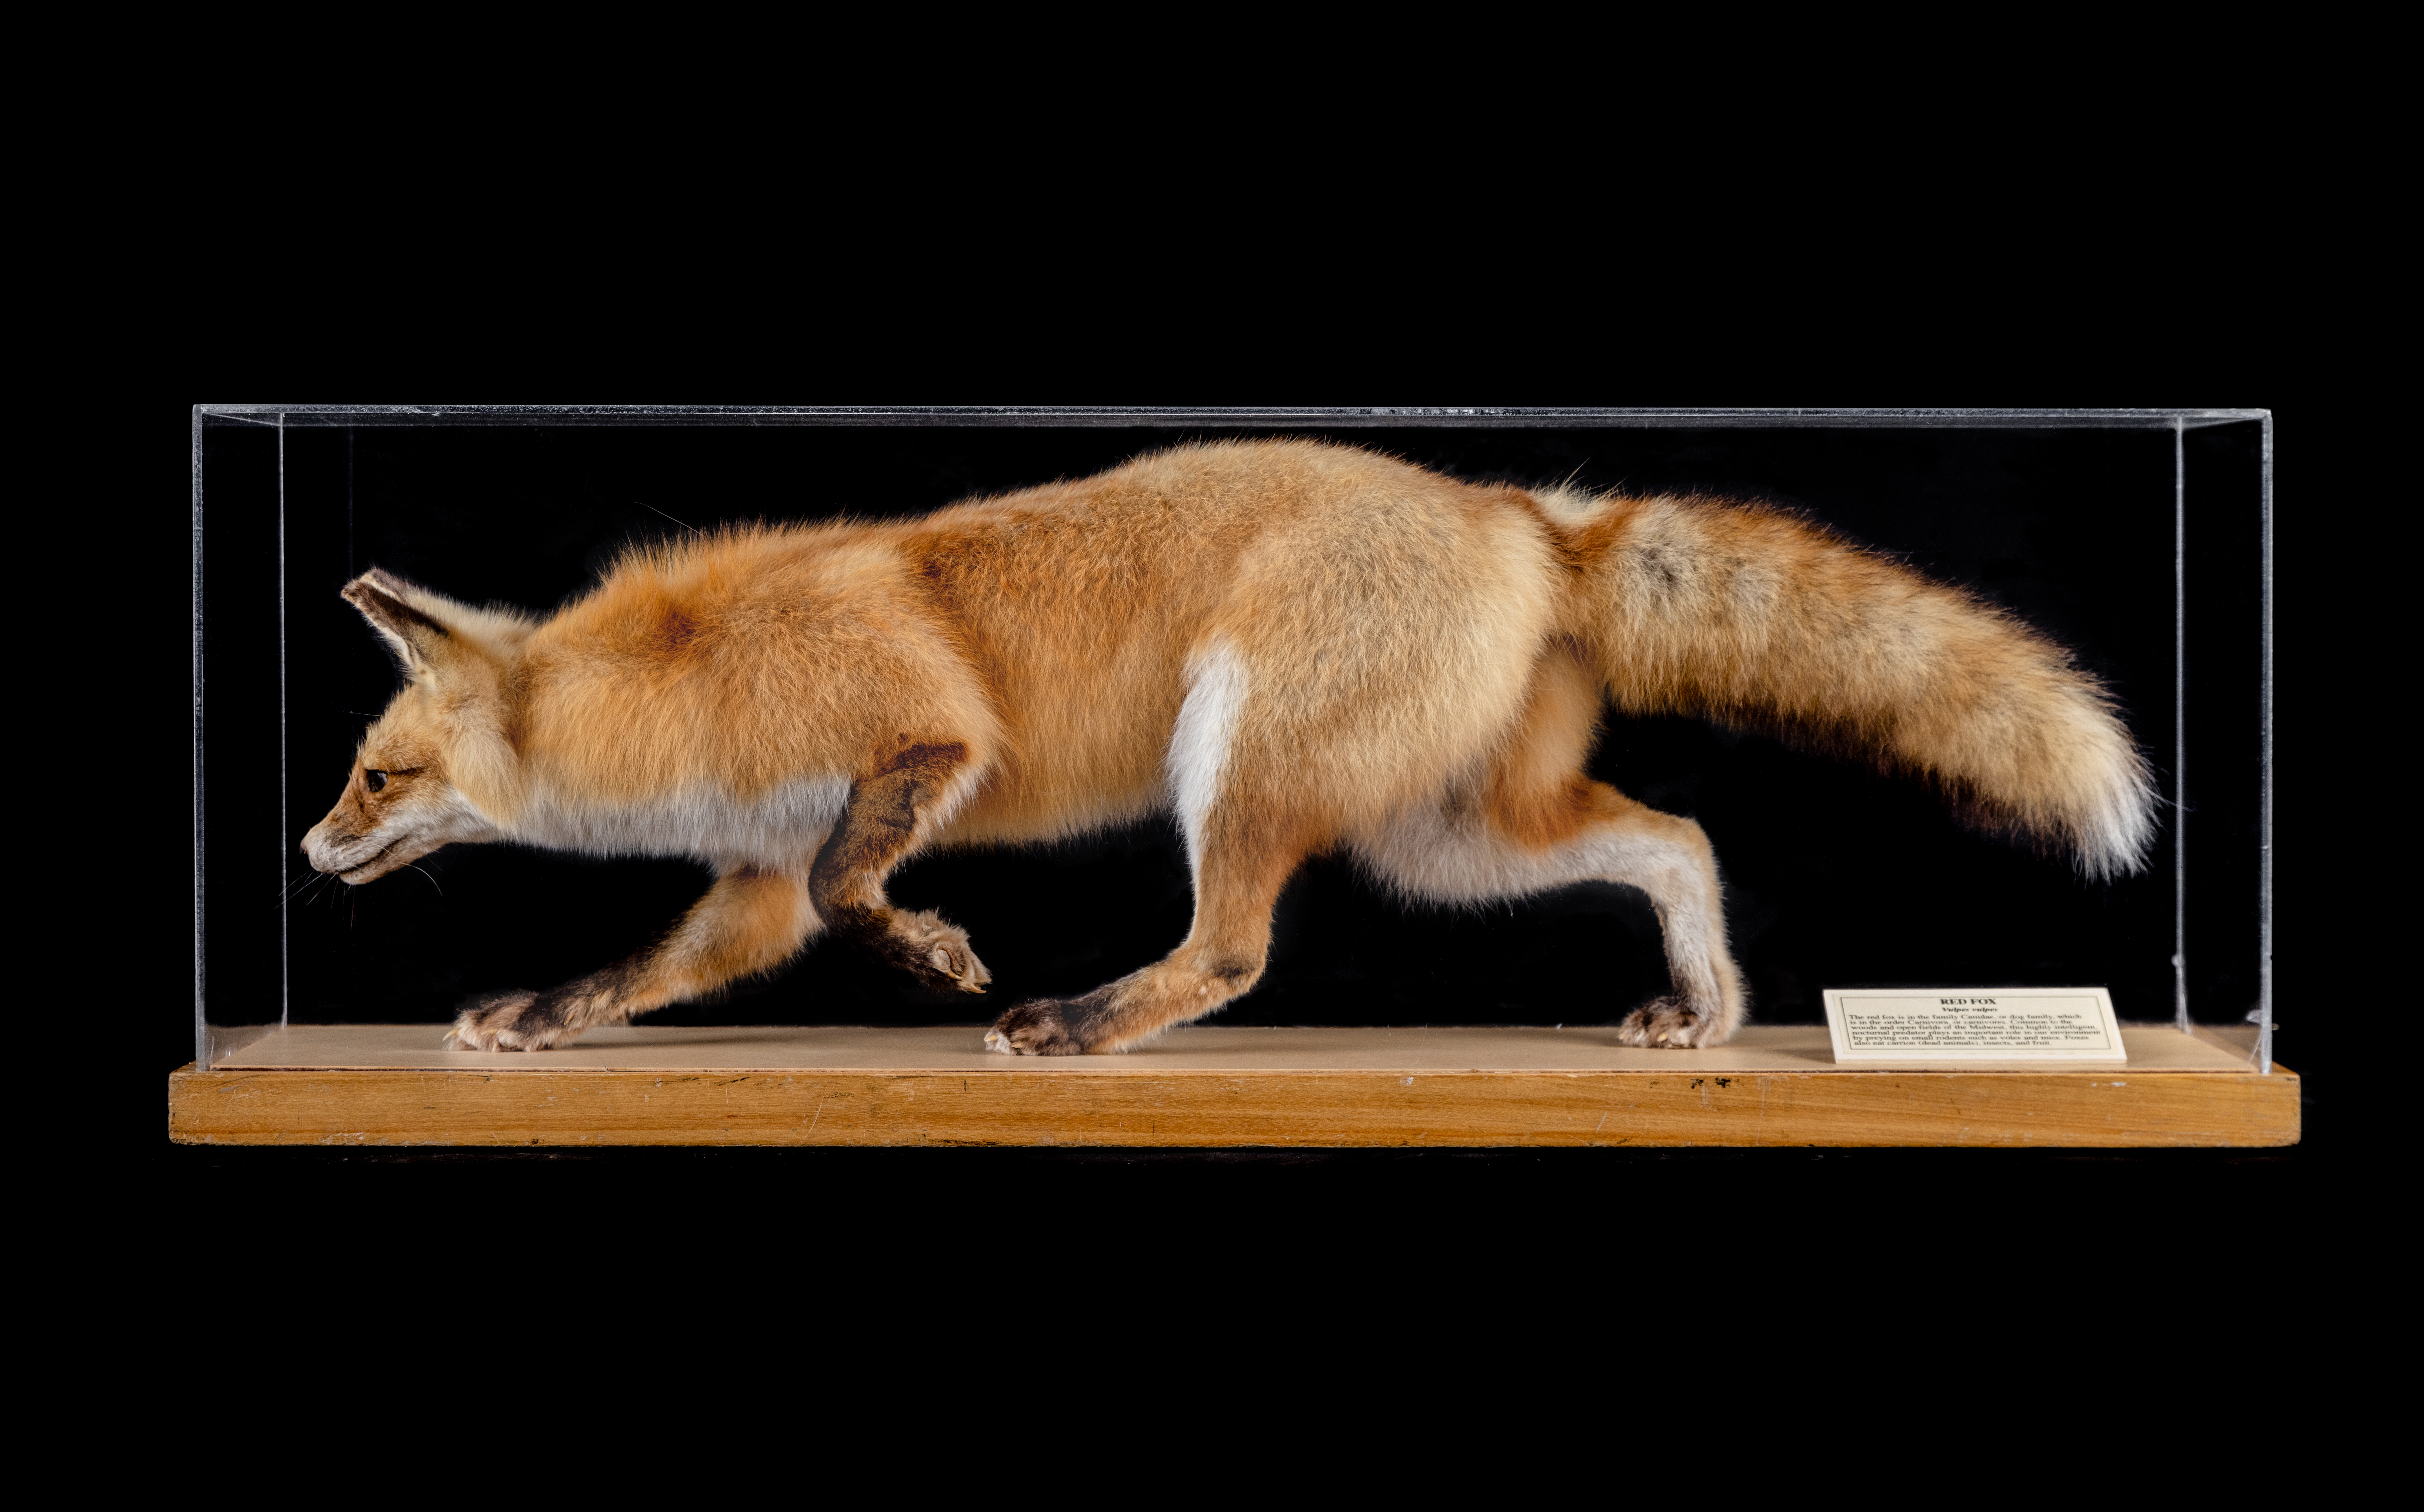 A museum display case featuring a taxidermied red fox in a walking posture.